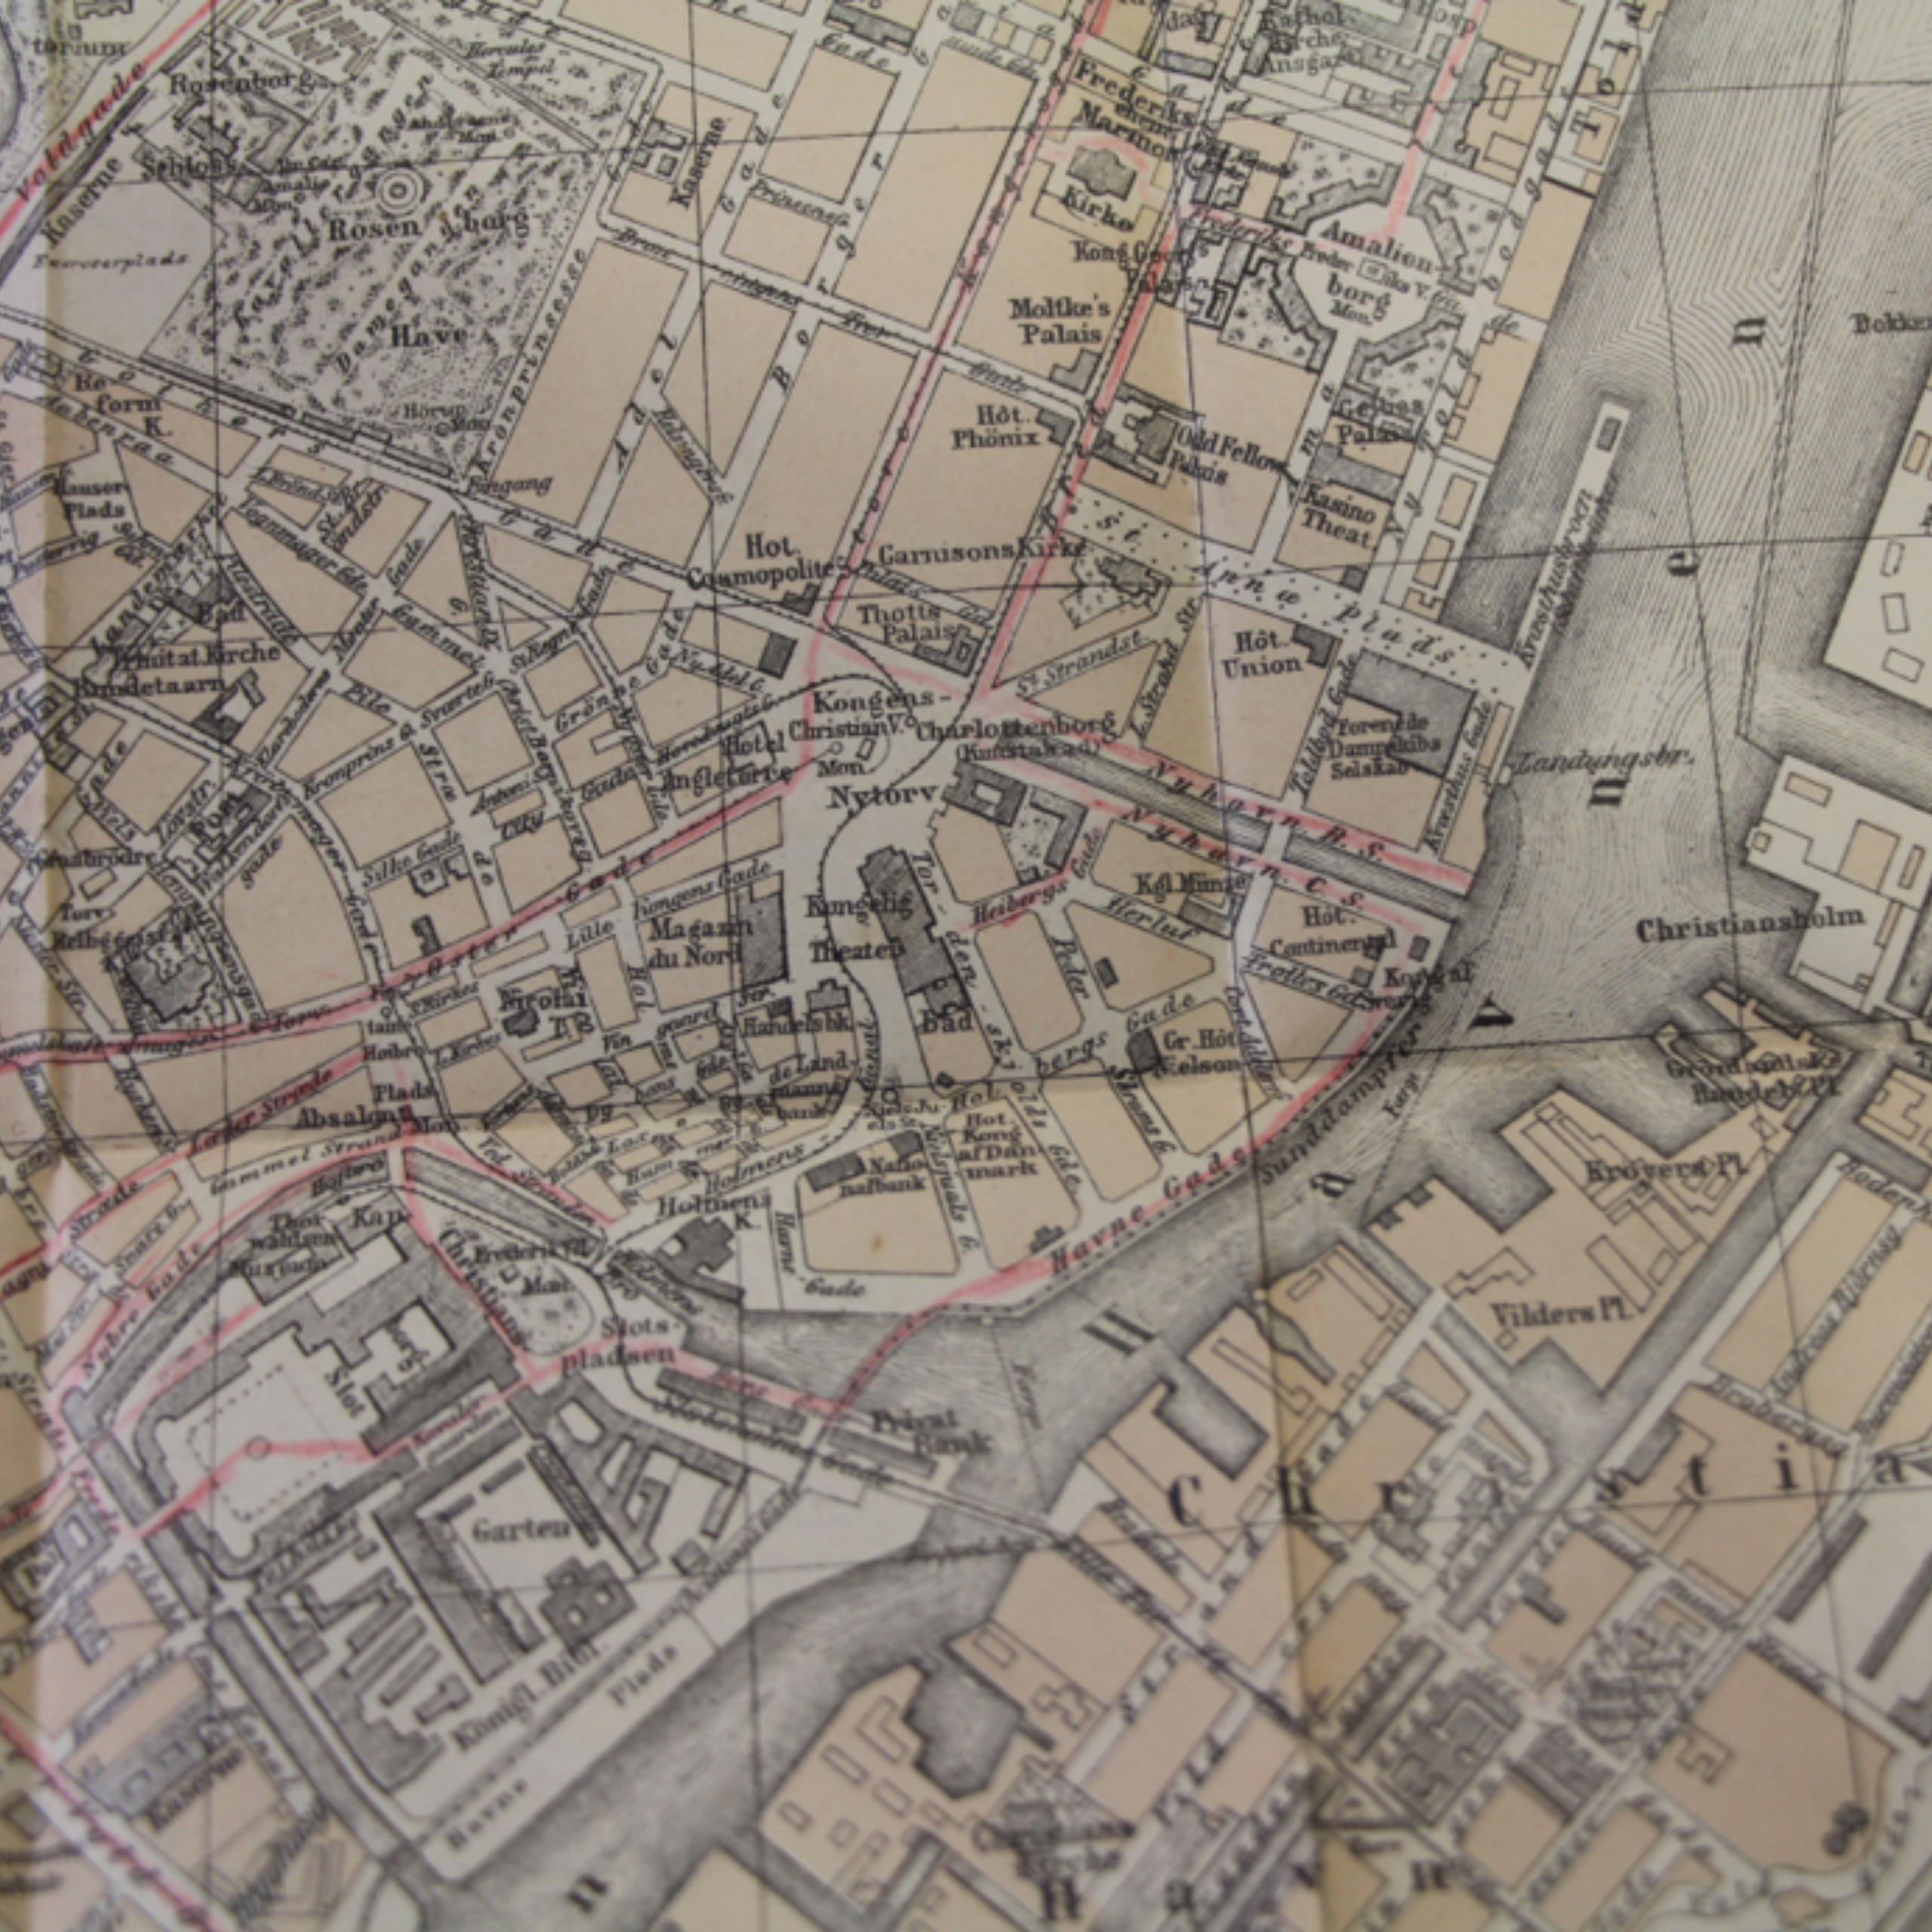 Zoomed in image of a historic map of Copenhagen.